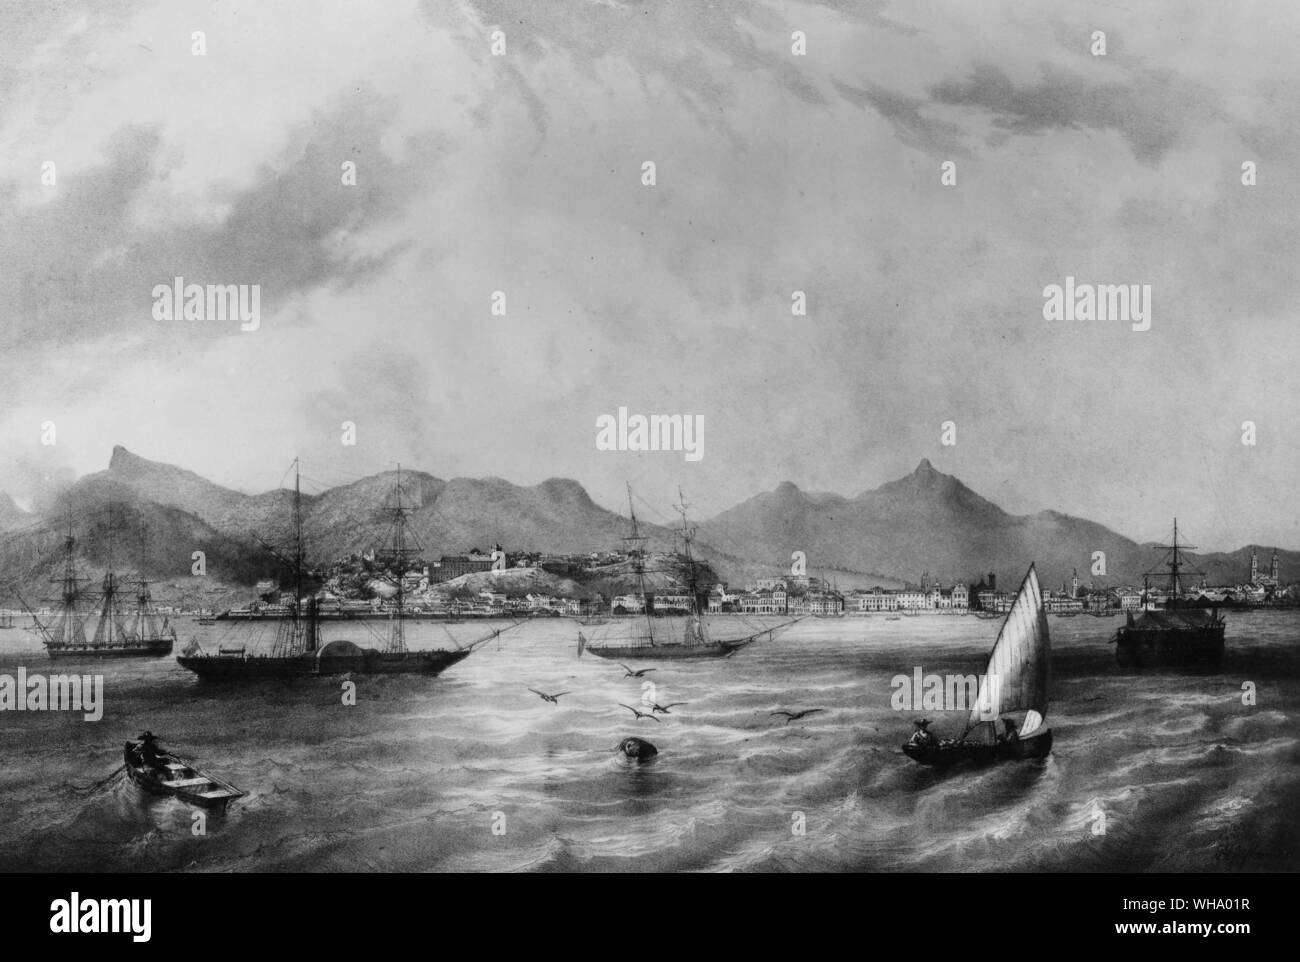 Harbour at Rio de Janeiro, Brazil; city in the background. Lithogrpah, early 19th century. Stock Photo